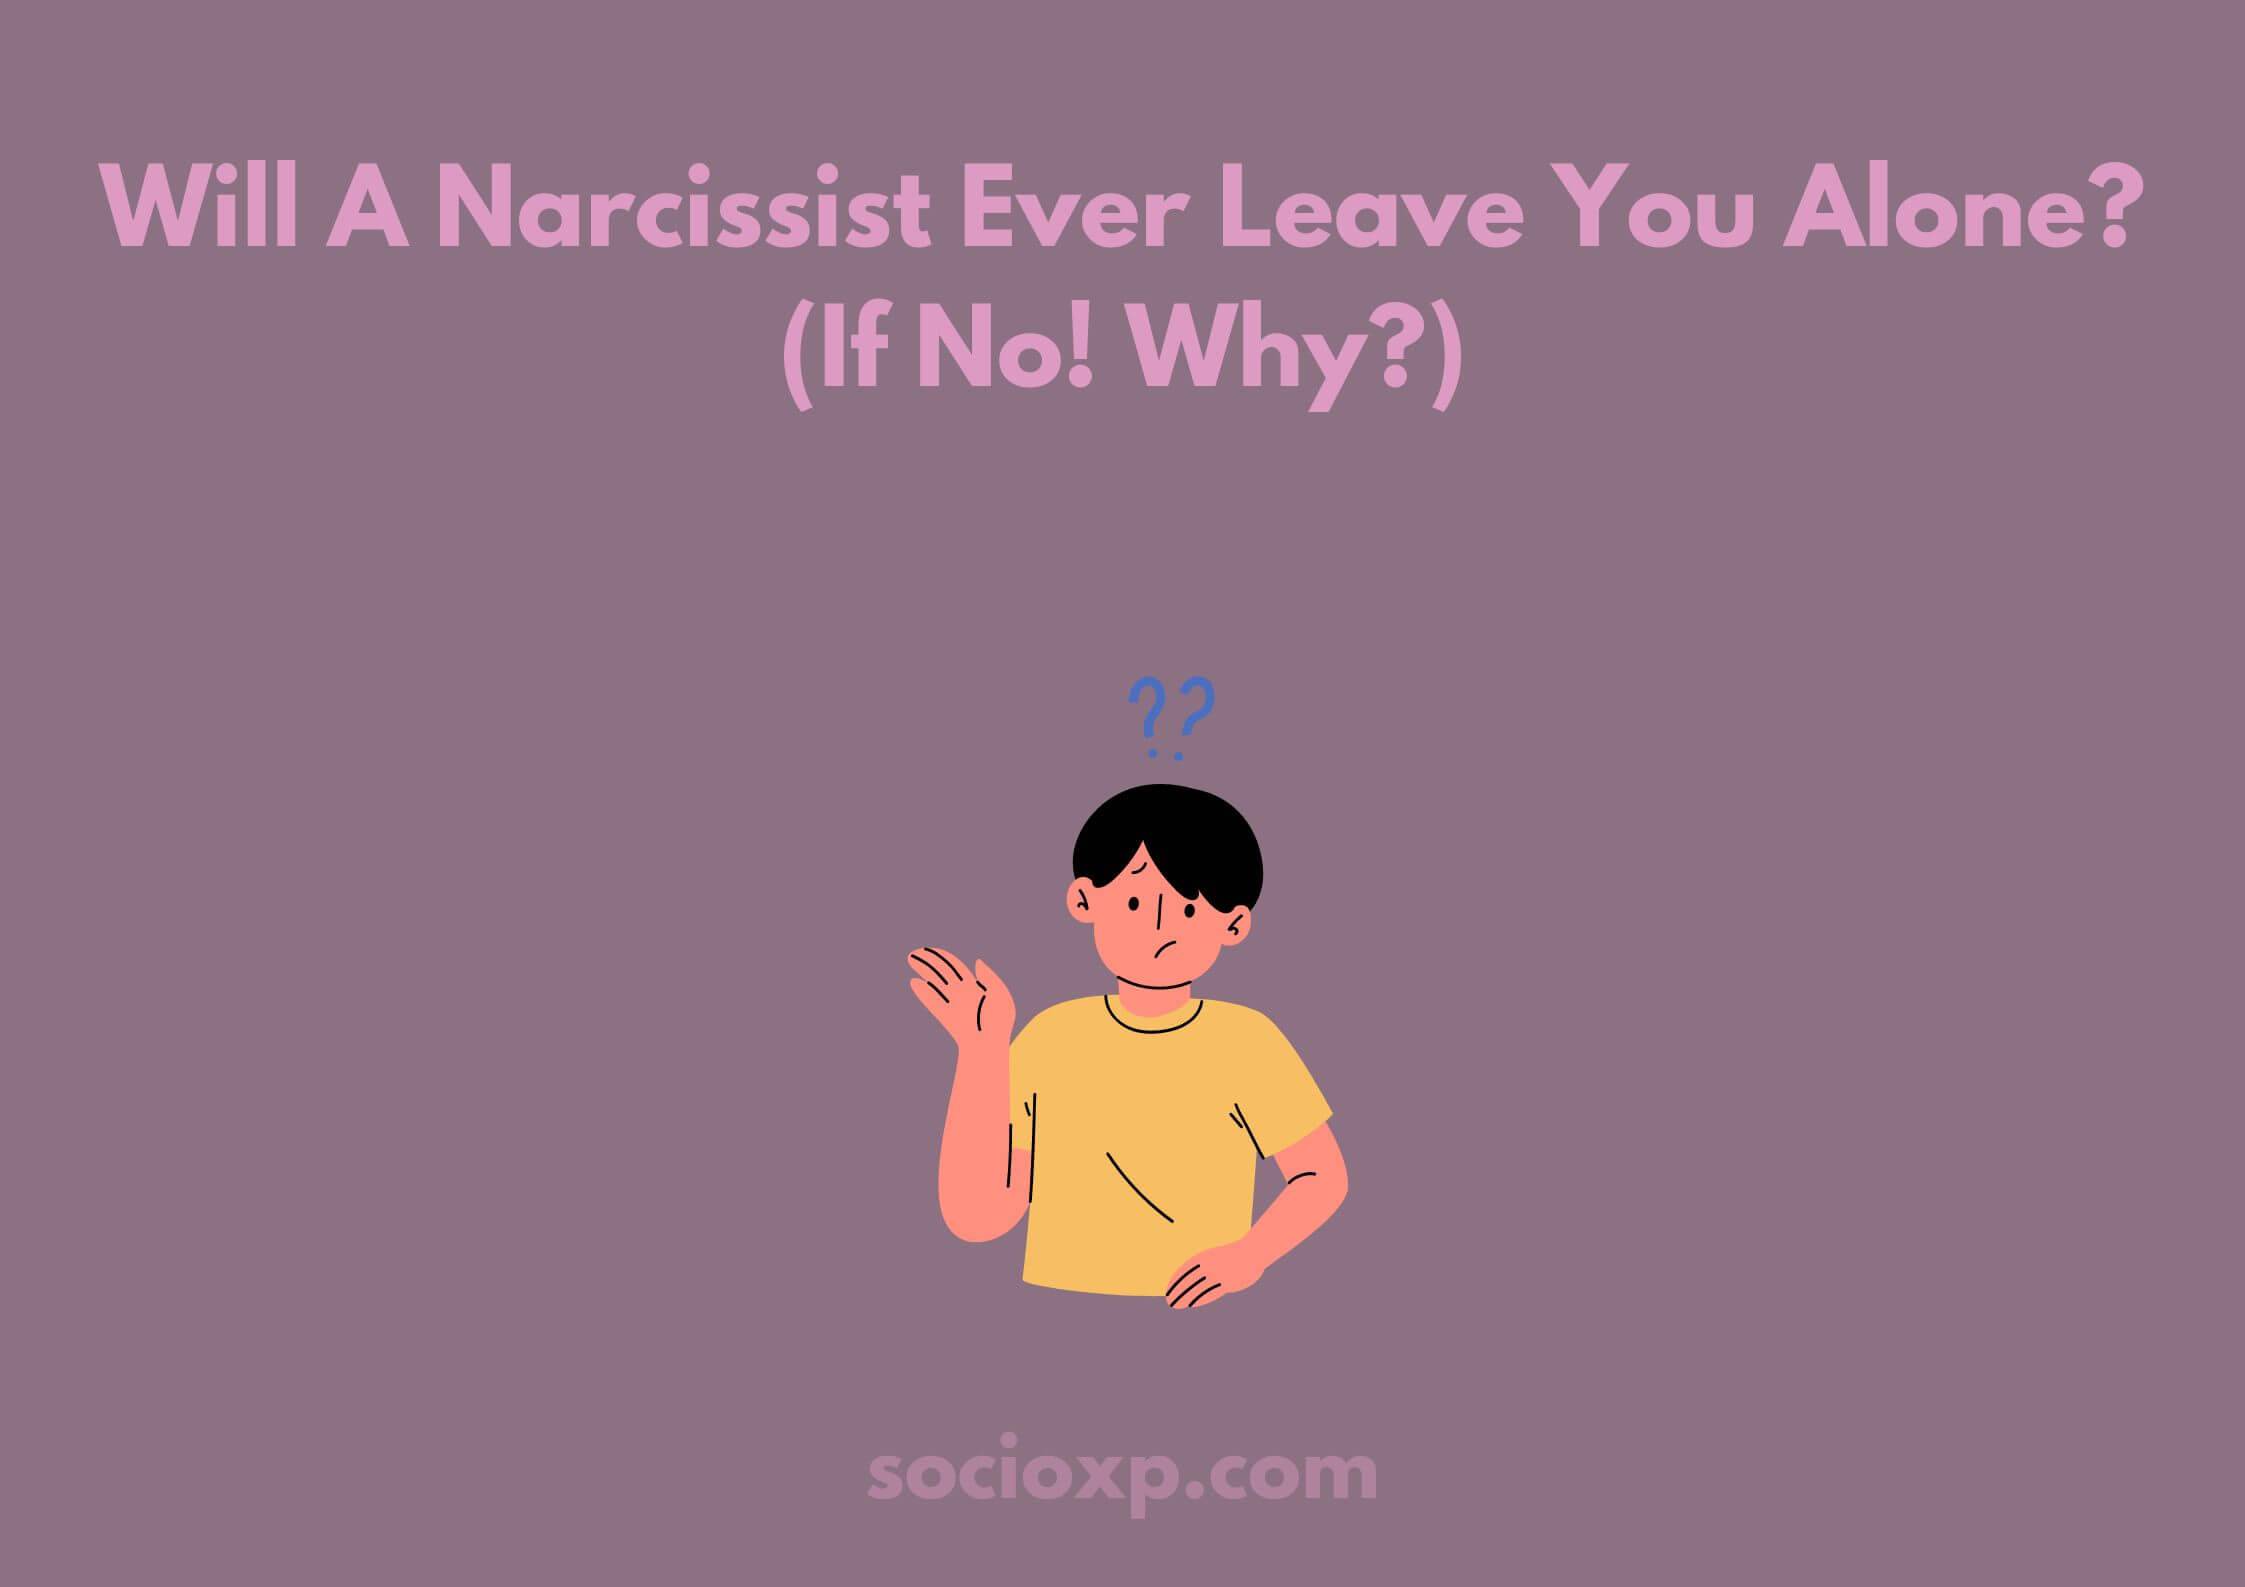 Will A Narcissist Ever Leave You Alone? (If No! Why?)